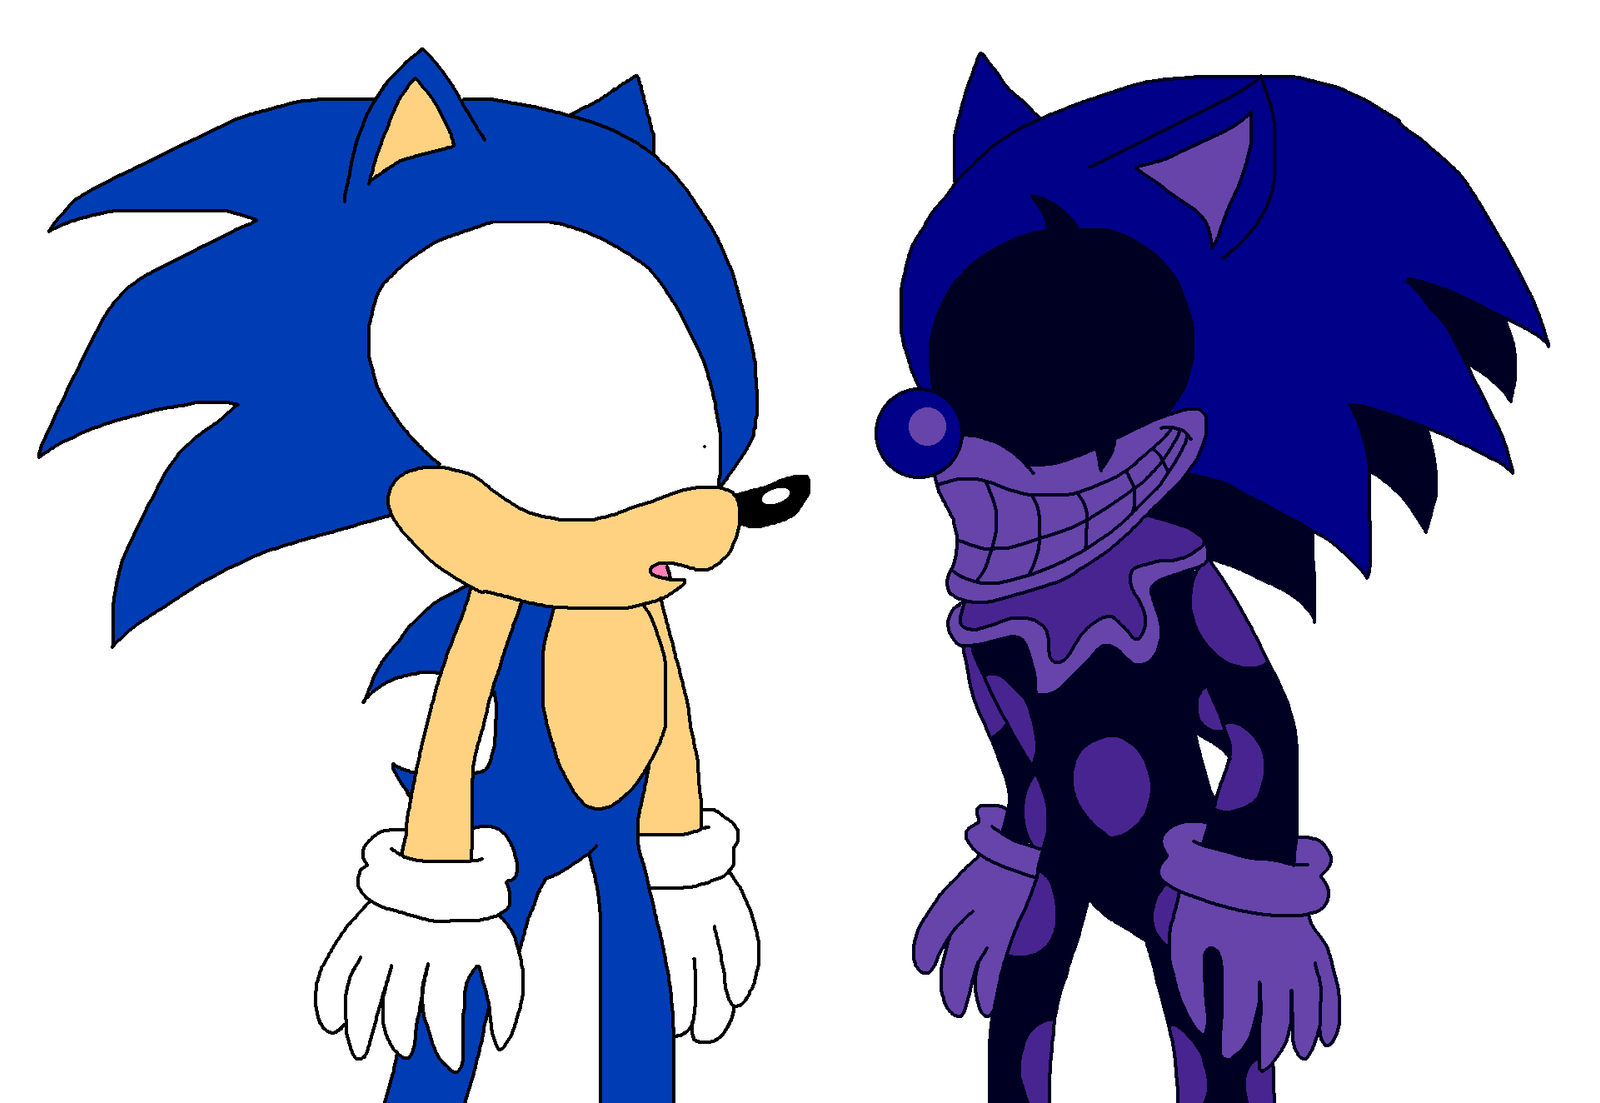 Sonic exe, Lord x and Majin sonic by richsquid1996 on DeviantArt